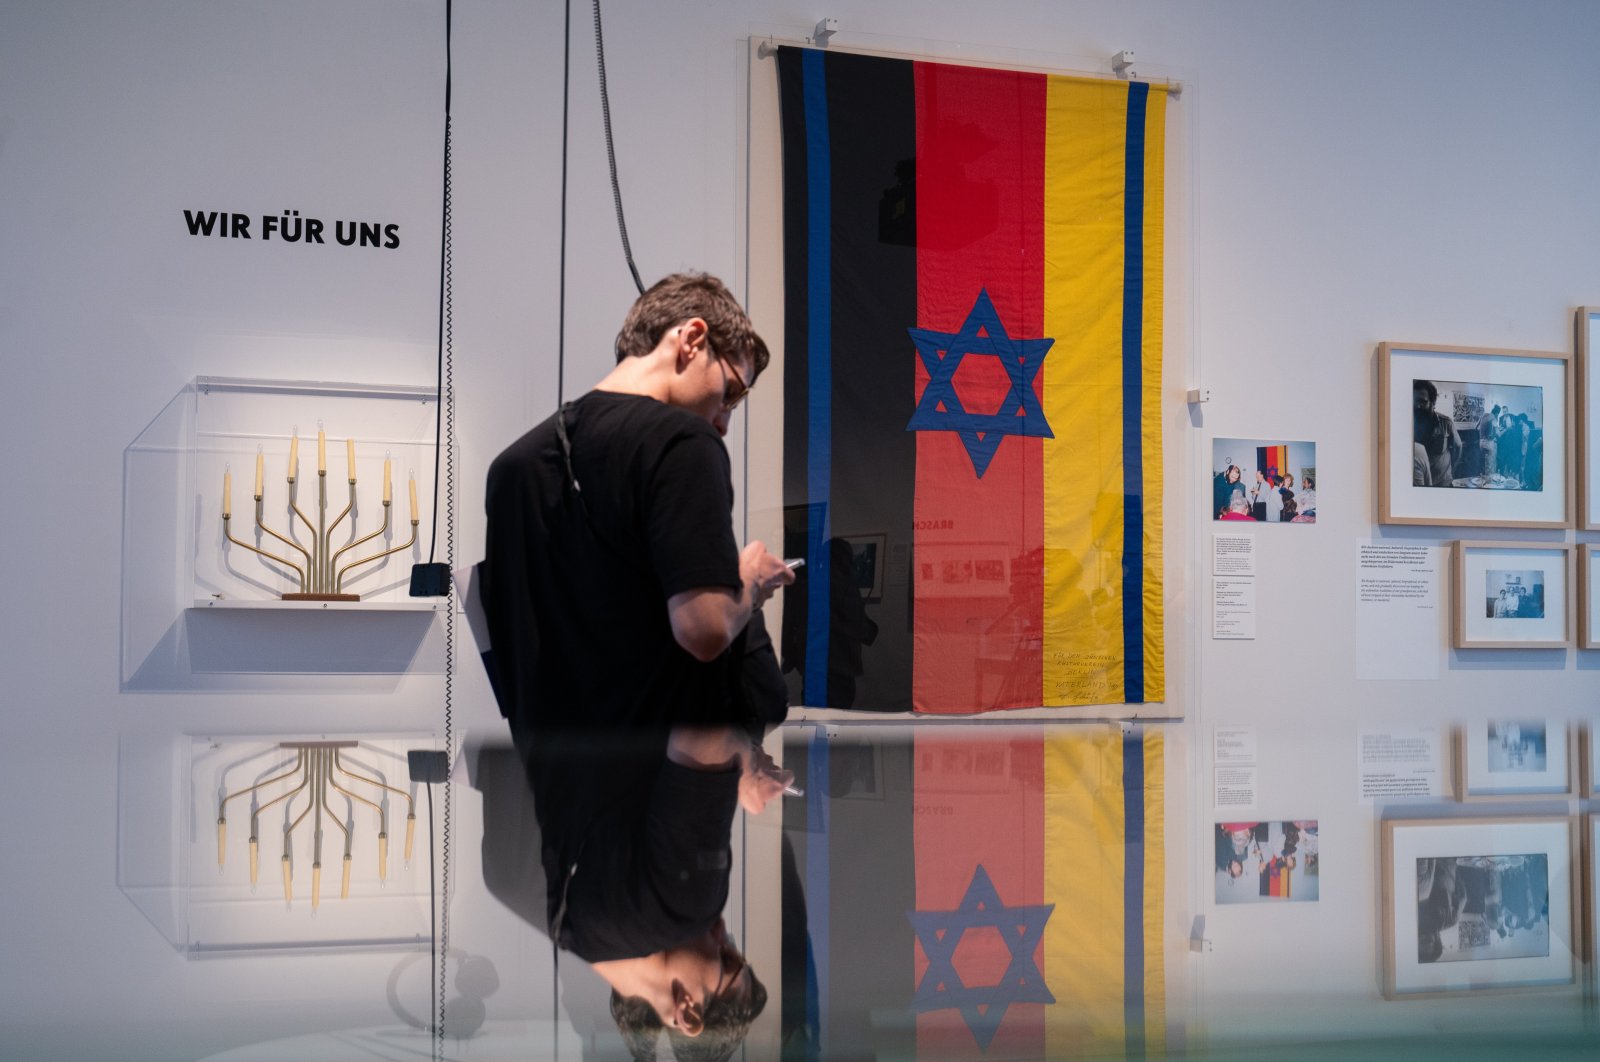 &quot;Another Country&quot;, an exhibition at Berlin&#039;s Jewish Museum, examines the &quot;hope and frustration&quot; Jews experienced behind the wall in the GDR, a country with an antifascist self-image. (dpa Photo)